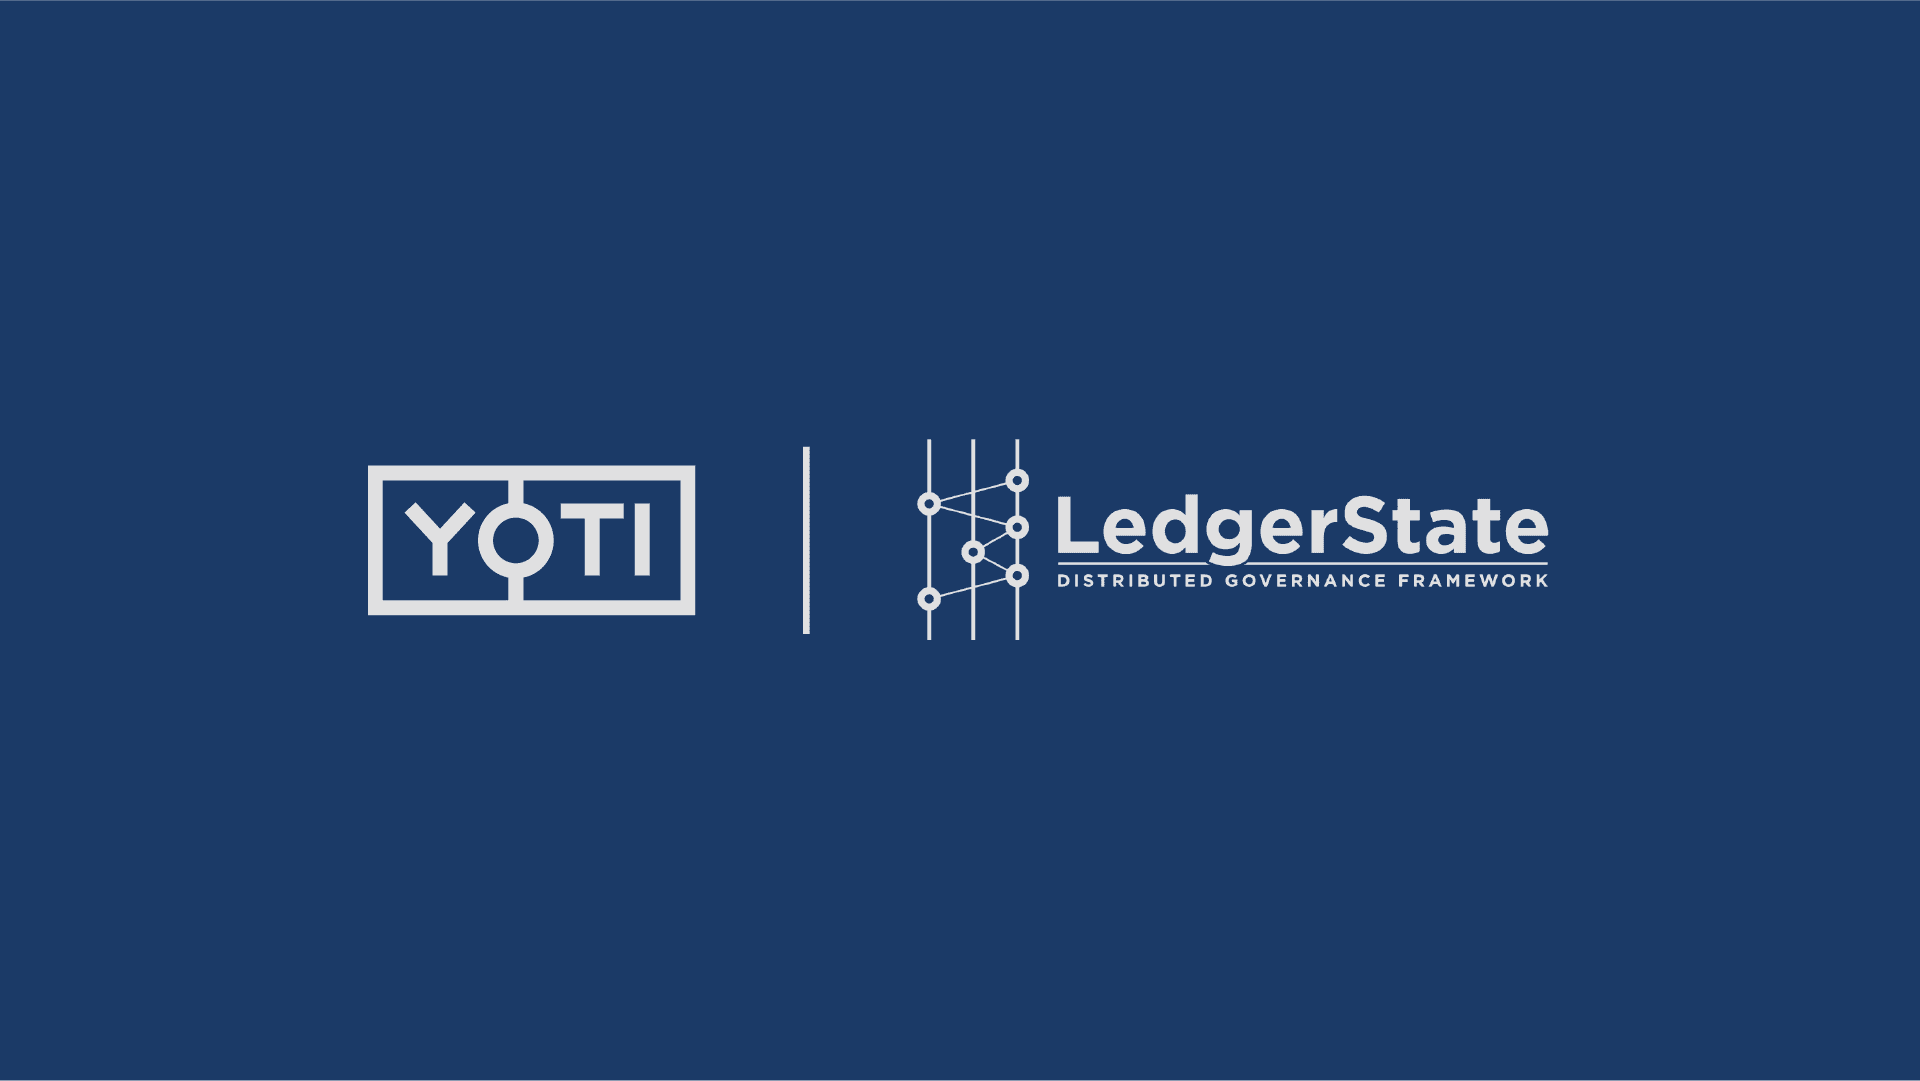 Yoti partners with LedgerState